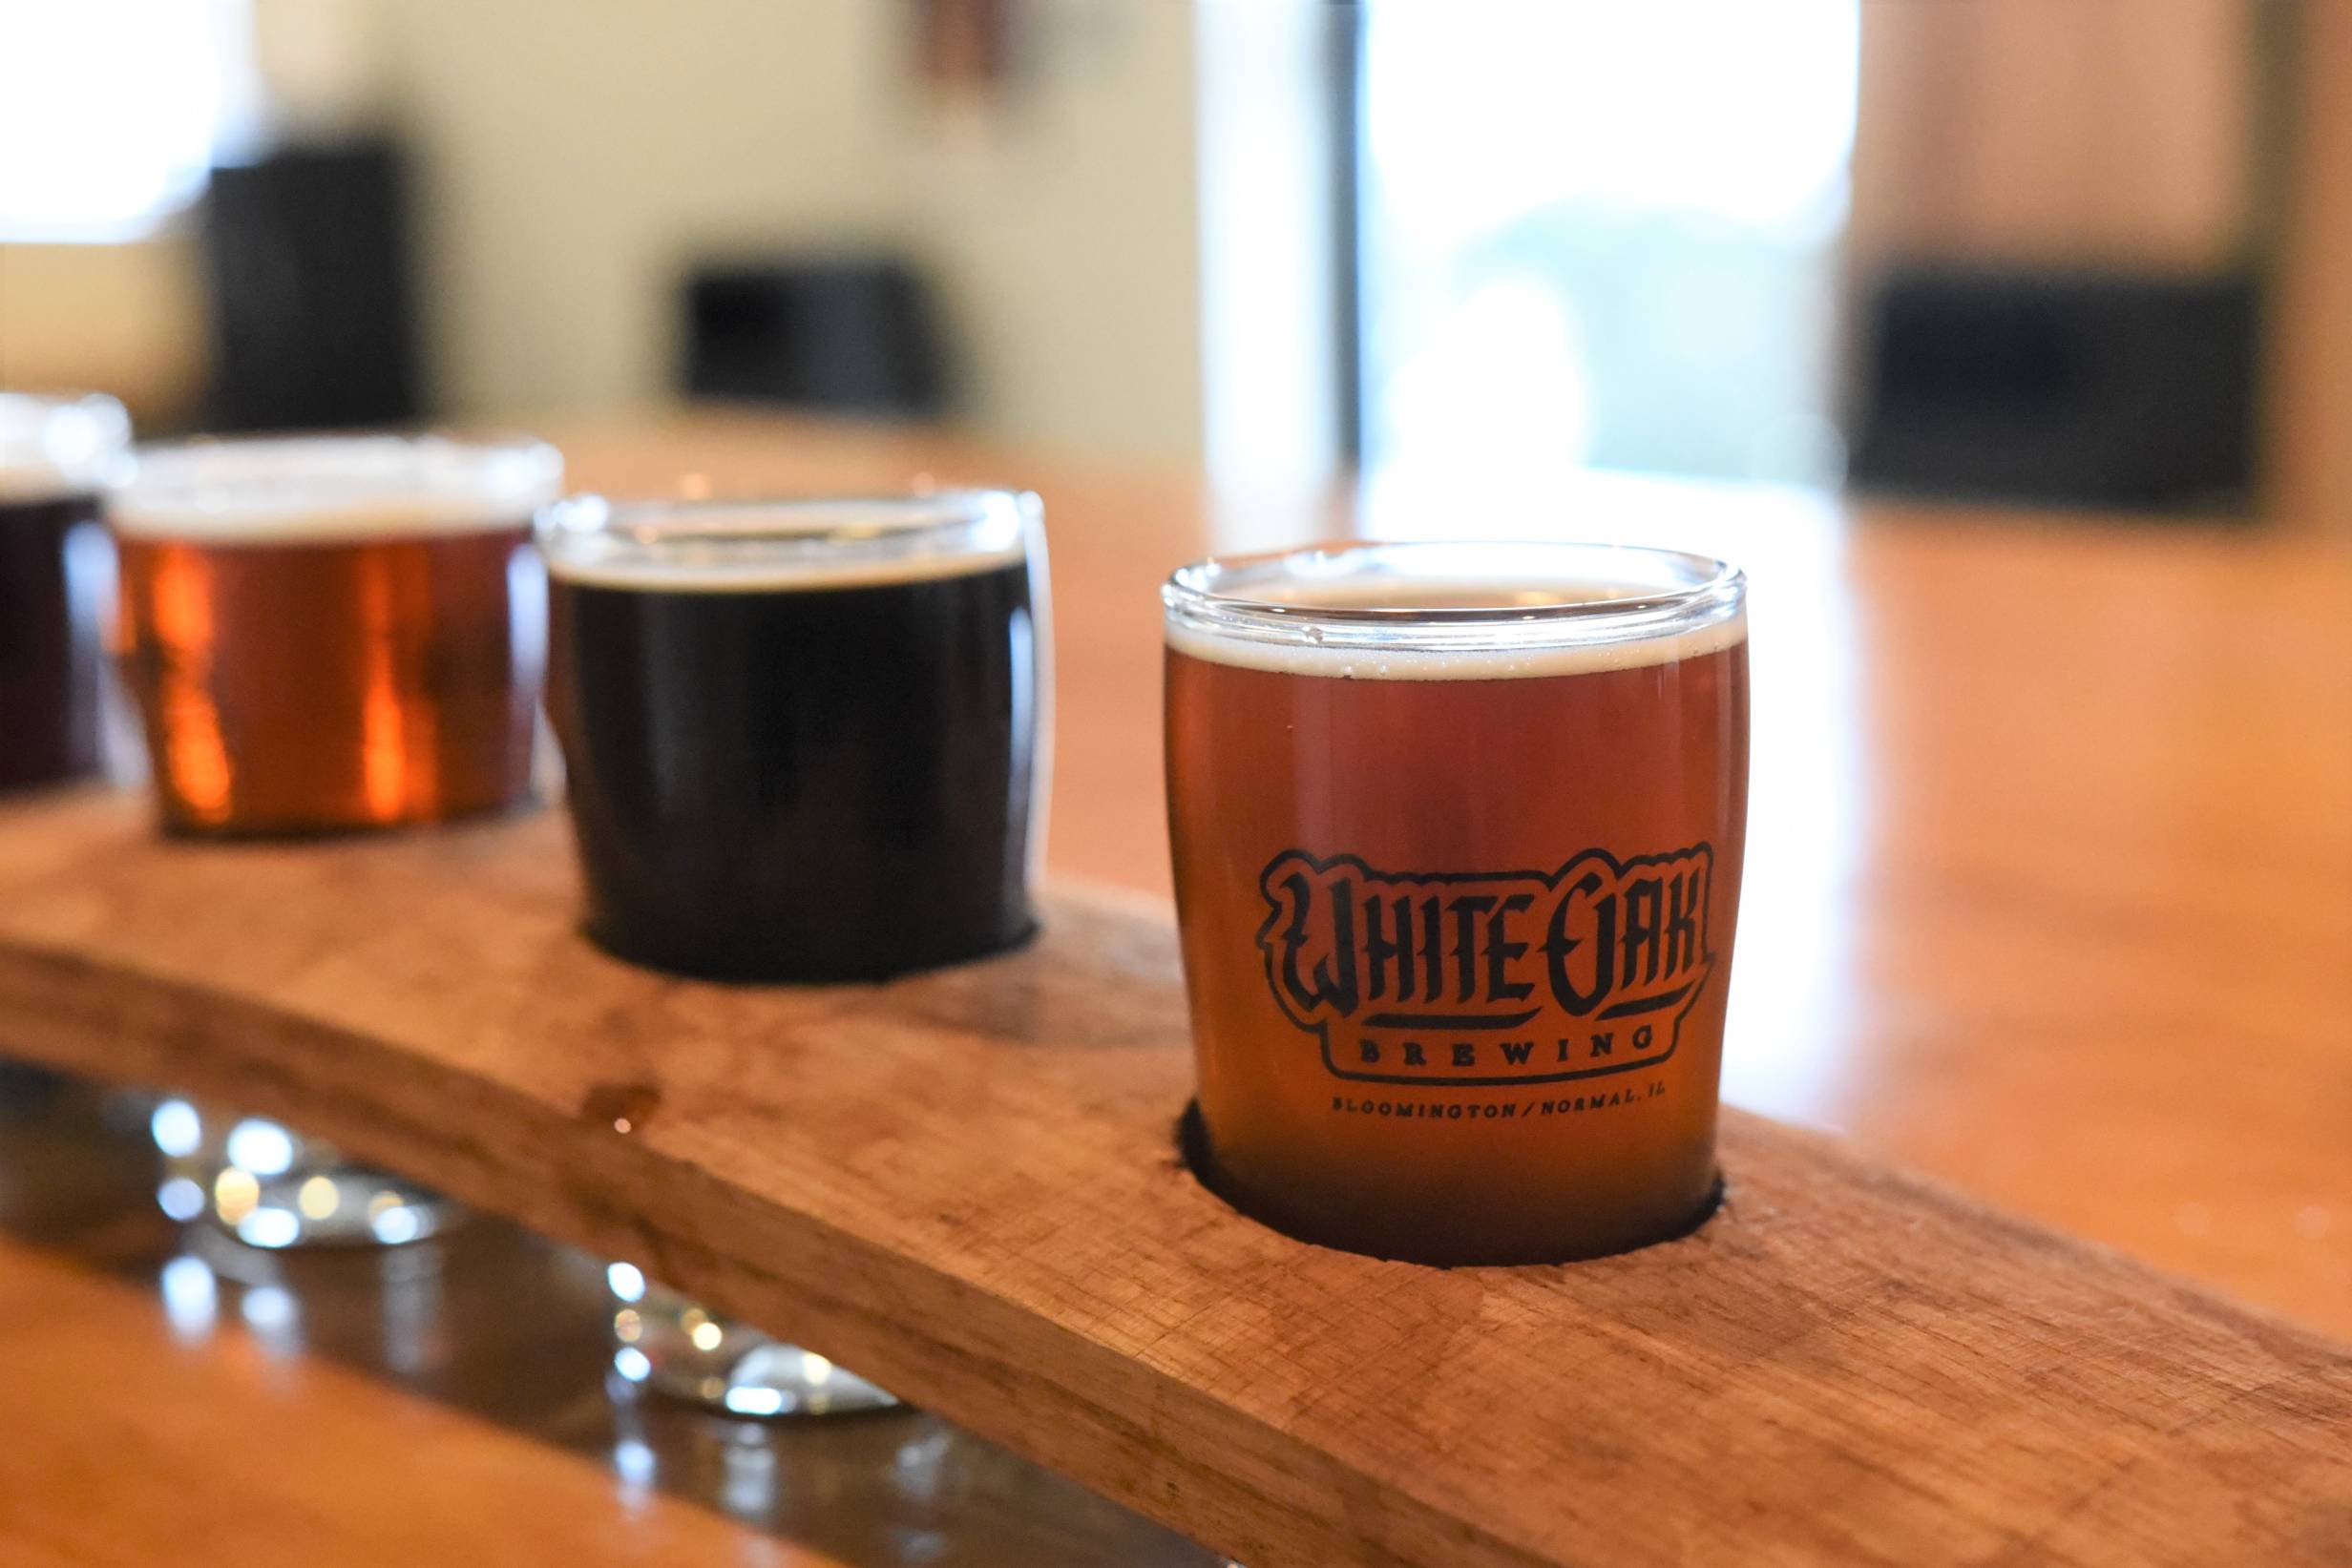 White Oak Beer offers lots of options for beer lovers